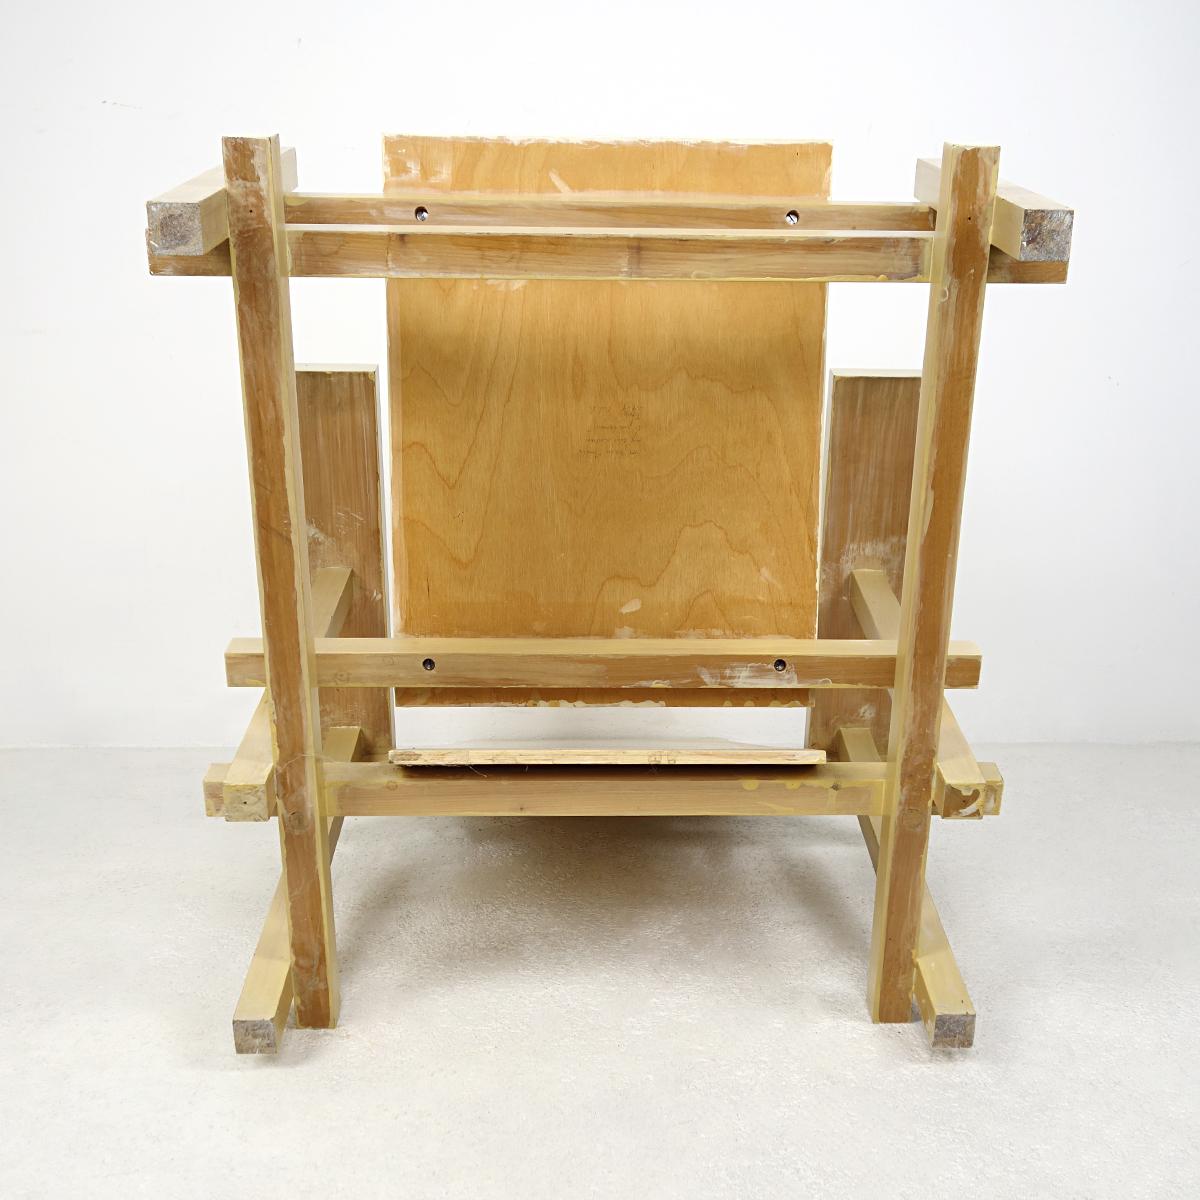 Modernist Chair Made of Uncolored Lacquered Wood after Gerrit Rietveld's Design 4